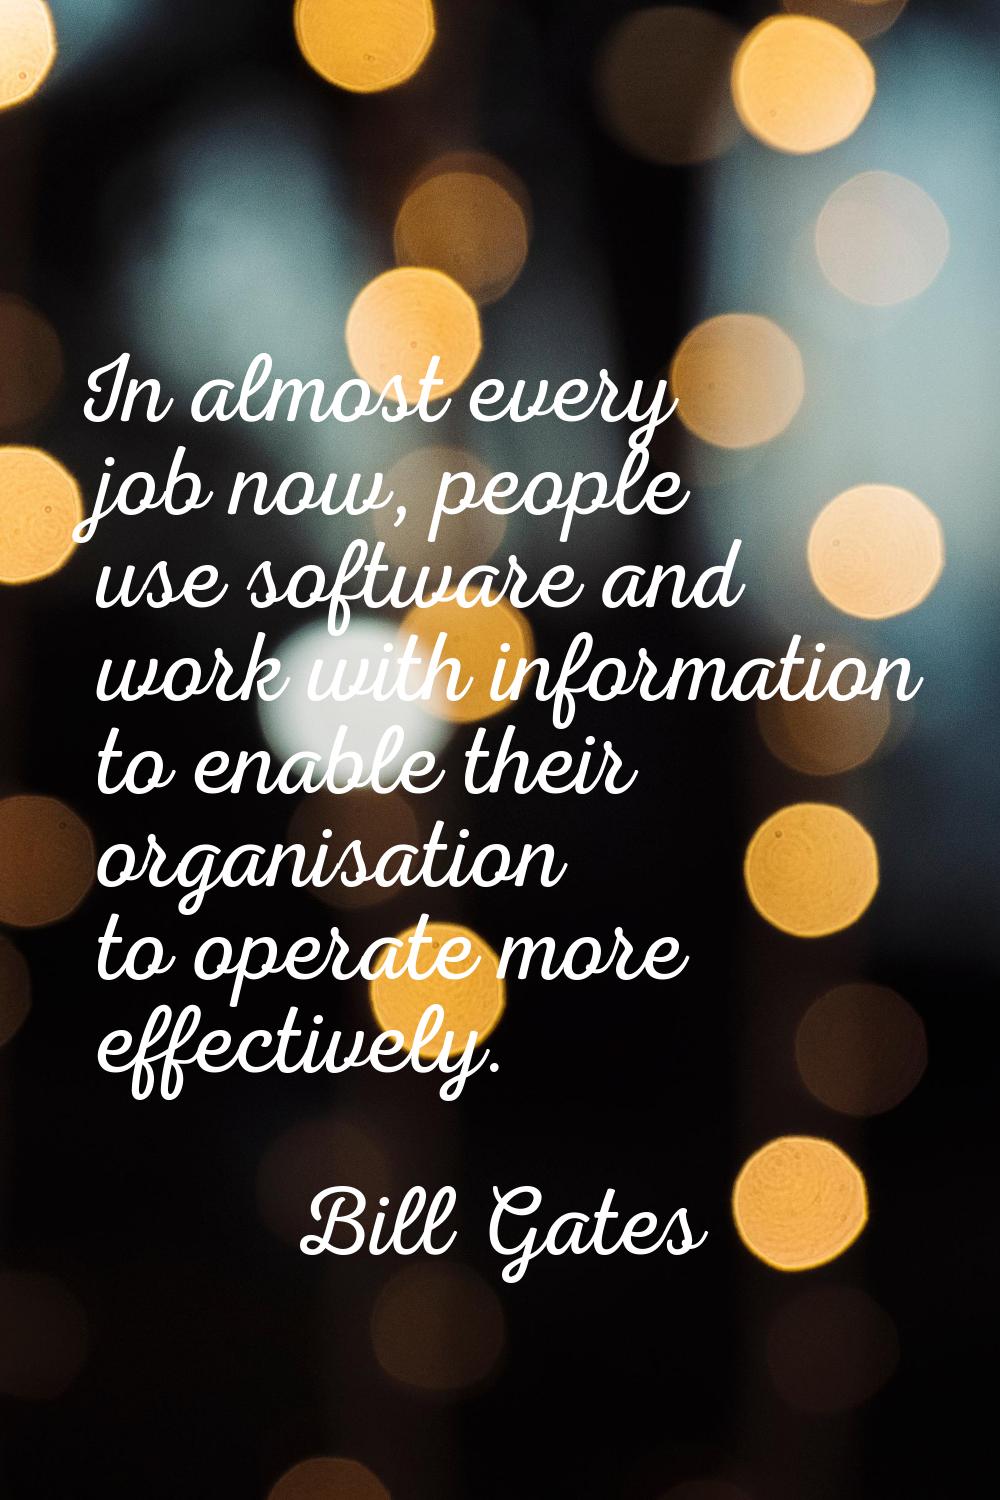 In almost every job now, people use software and work with information to enable their organisation